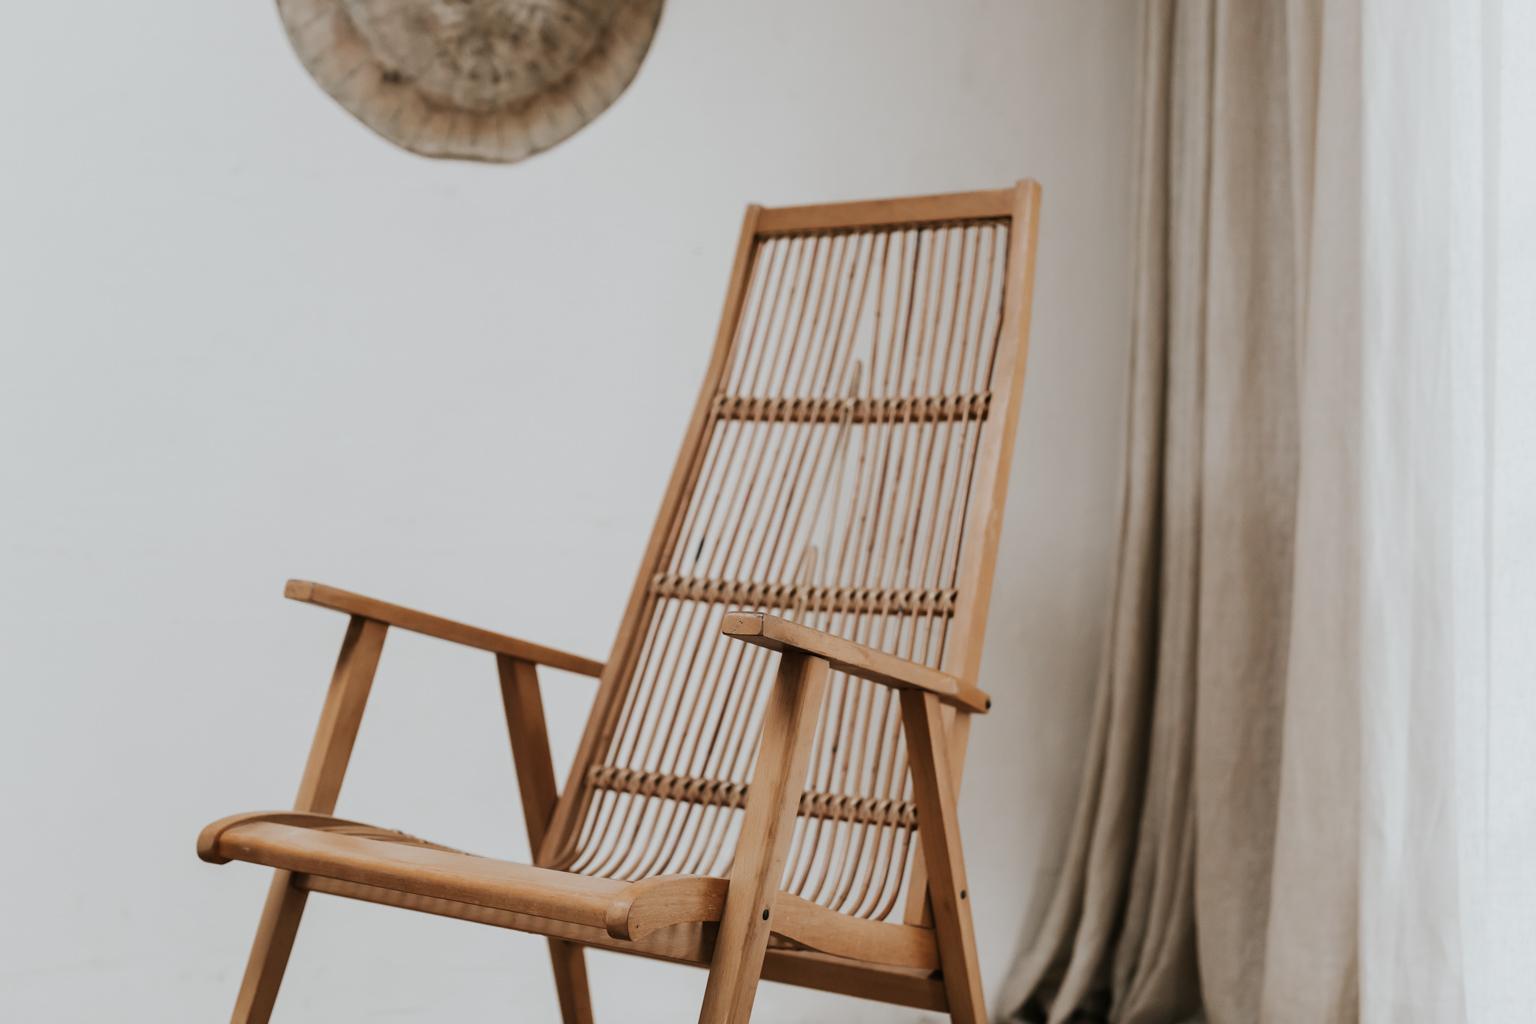 Straw 20th Century Vintage Rocking Chair For Sale